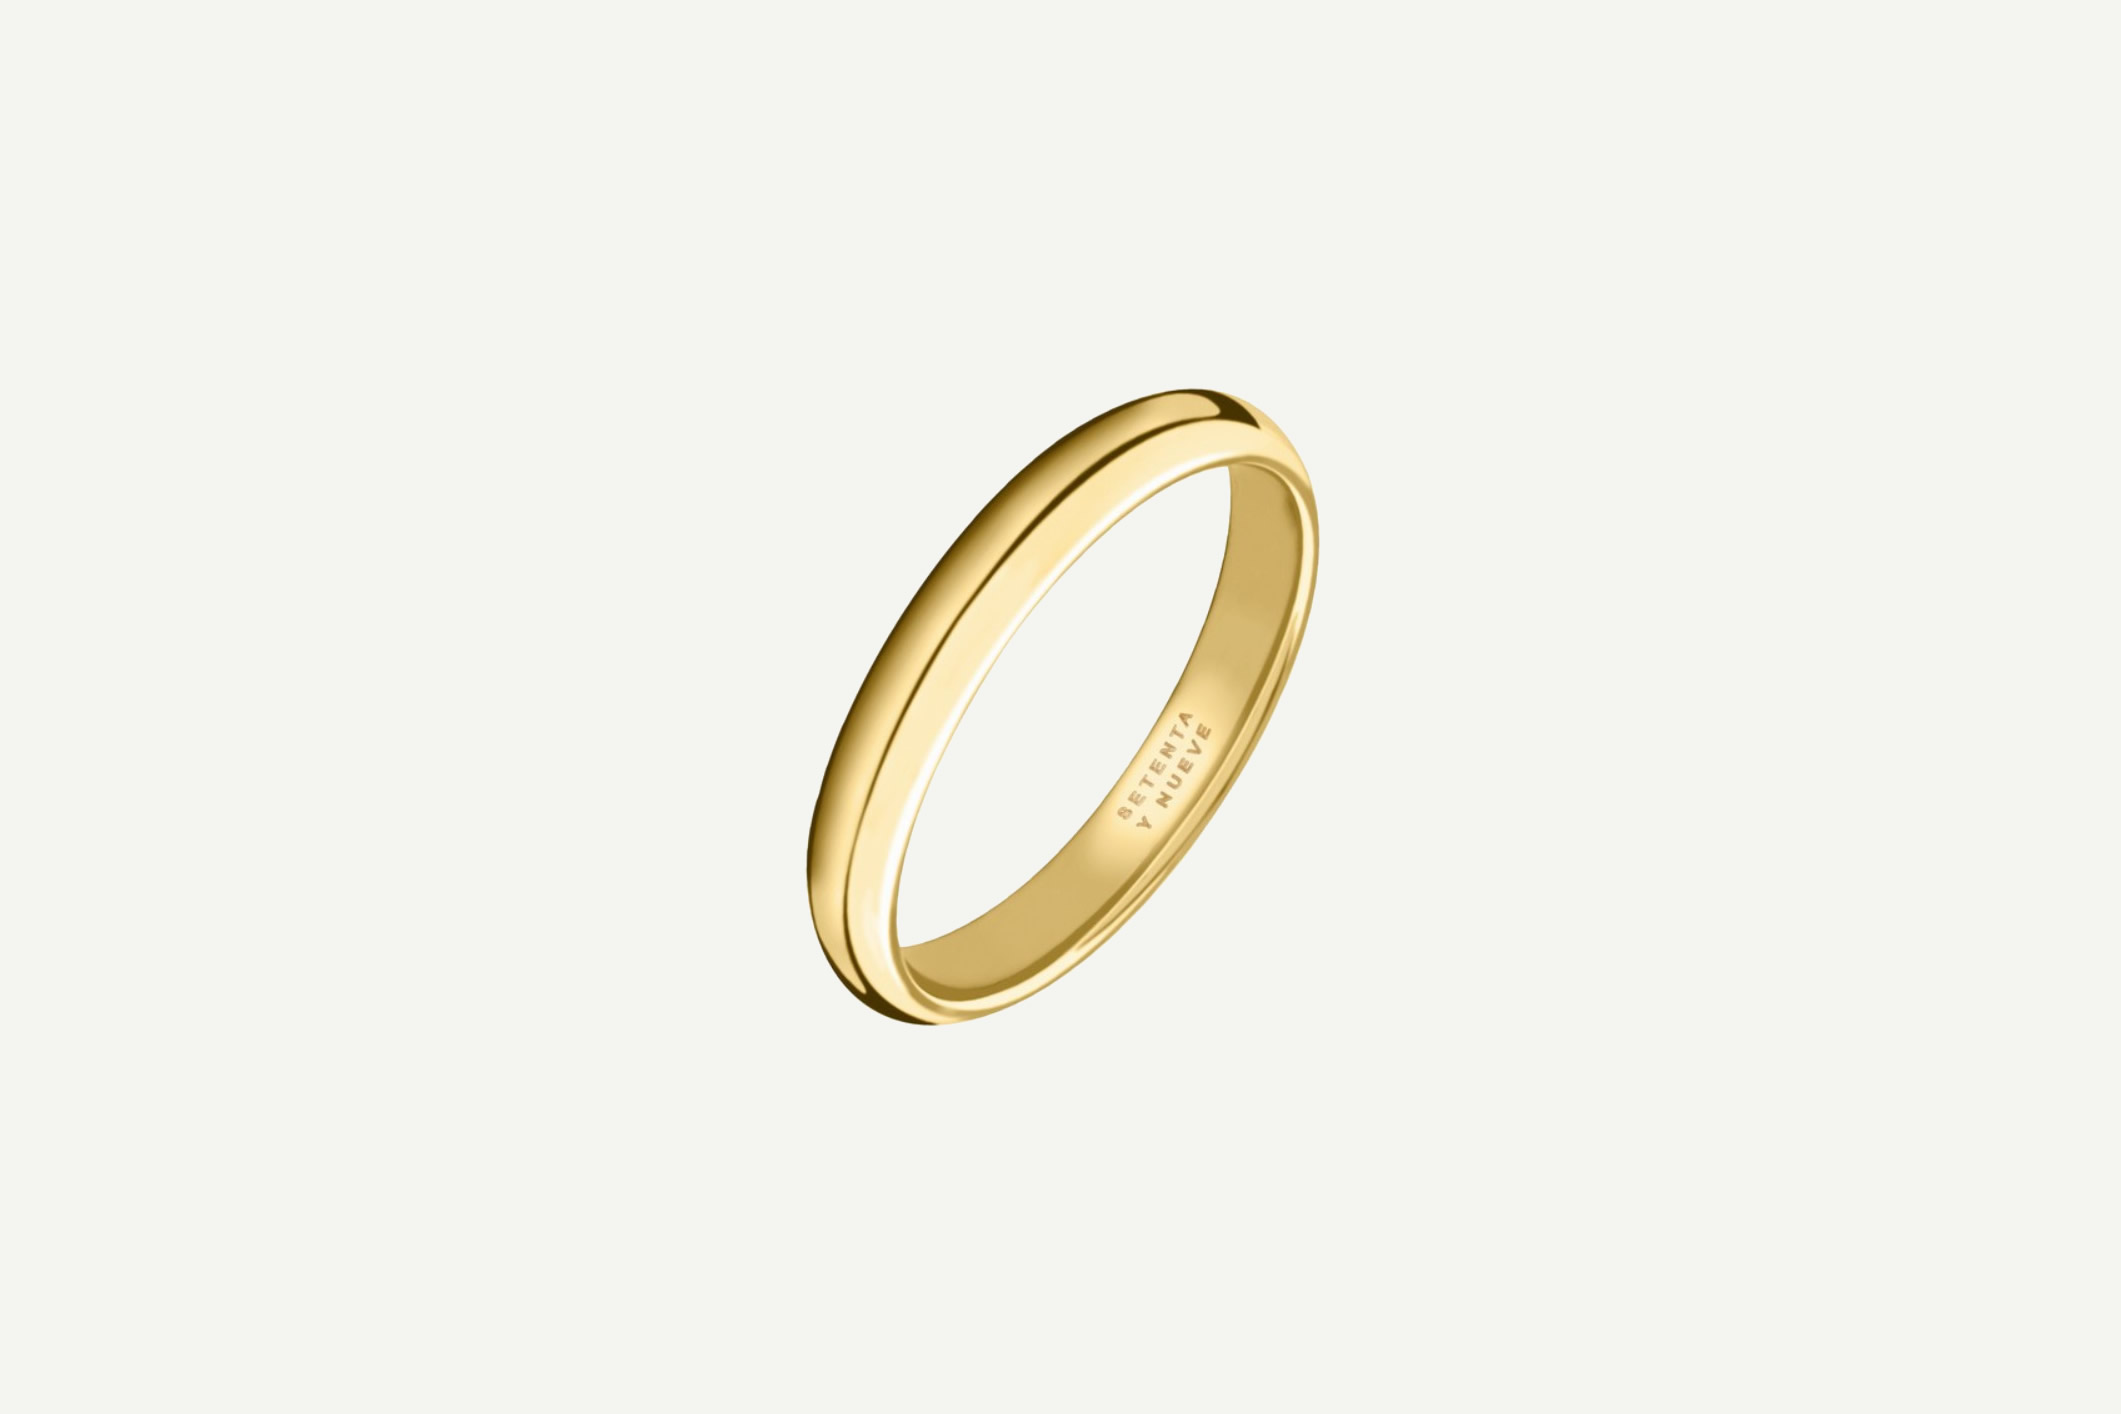 25 Different Types of Rings for Couples in Relationship